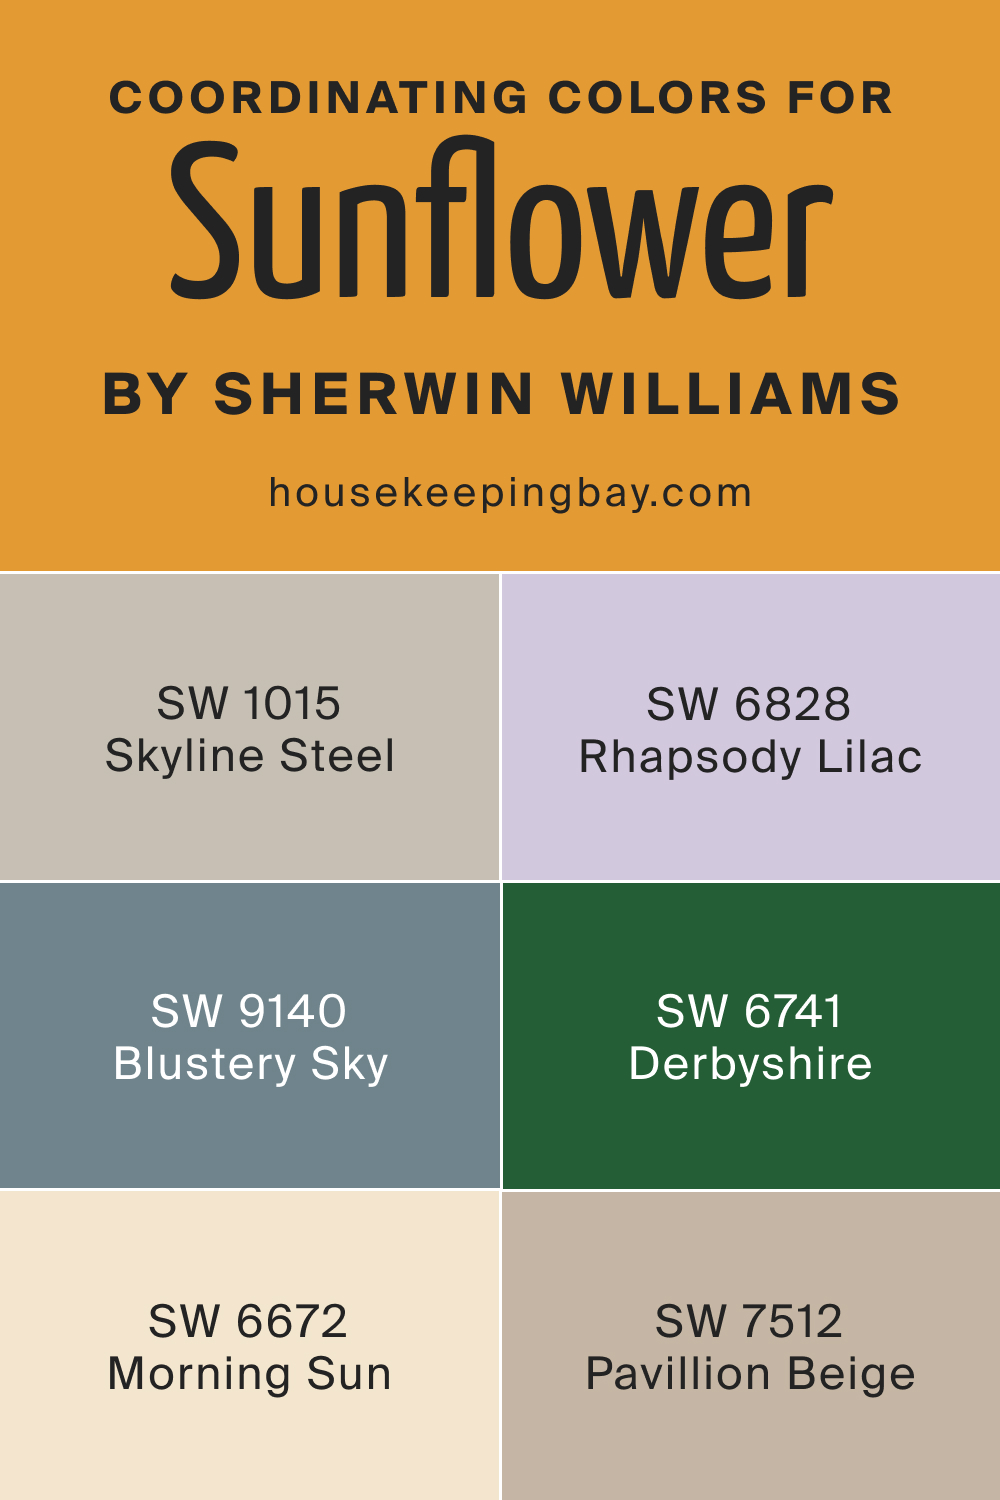 Coordinating Colors for Sunflower SW 6678 by Sherwin Williams